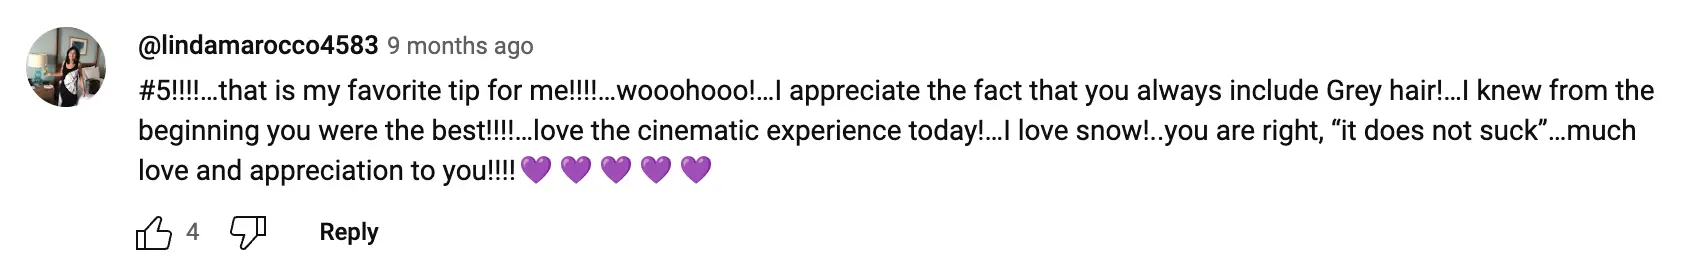 User @lindamarocco4583's comment under the YouTube video. | Source: youtube.com/Justin Hickox